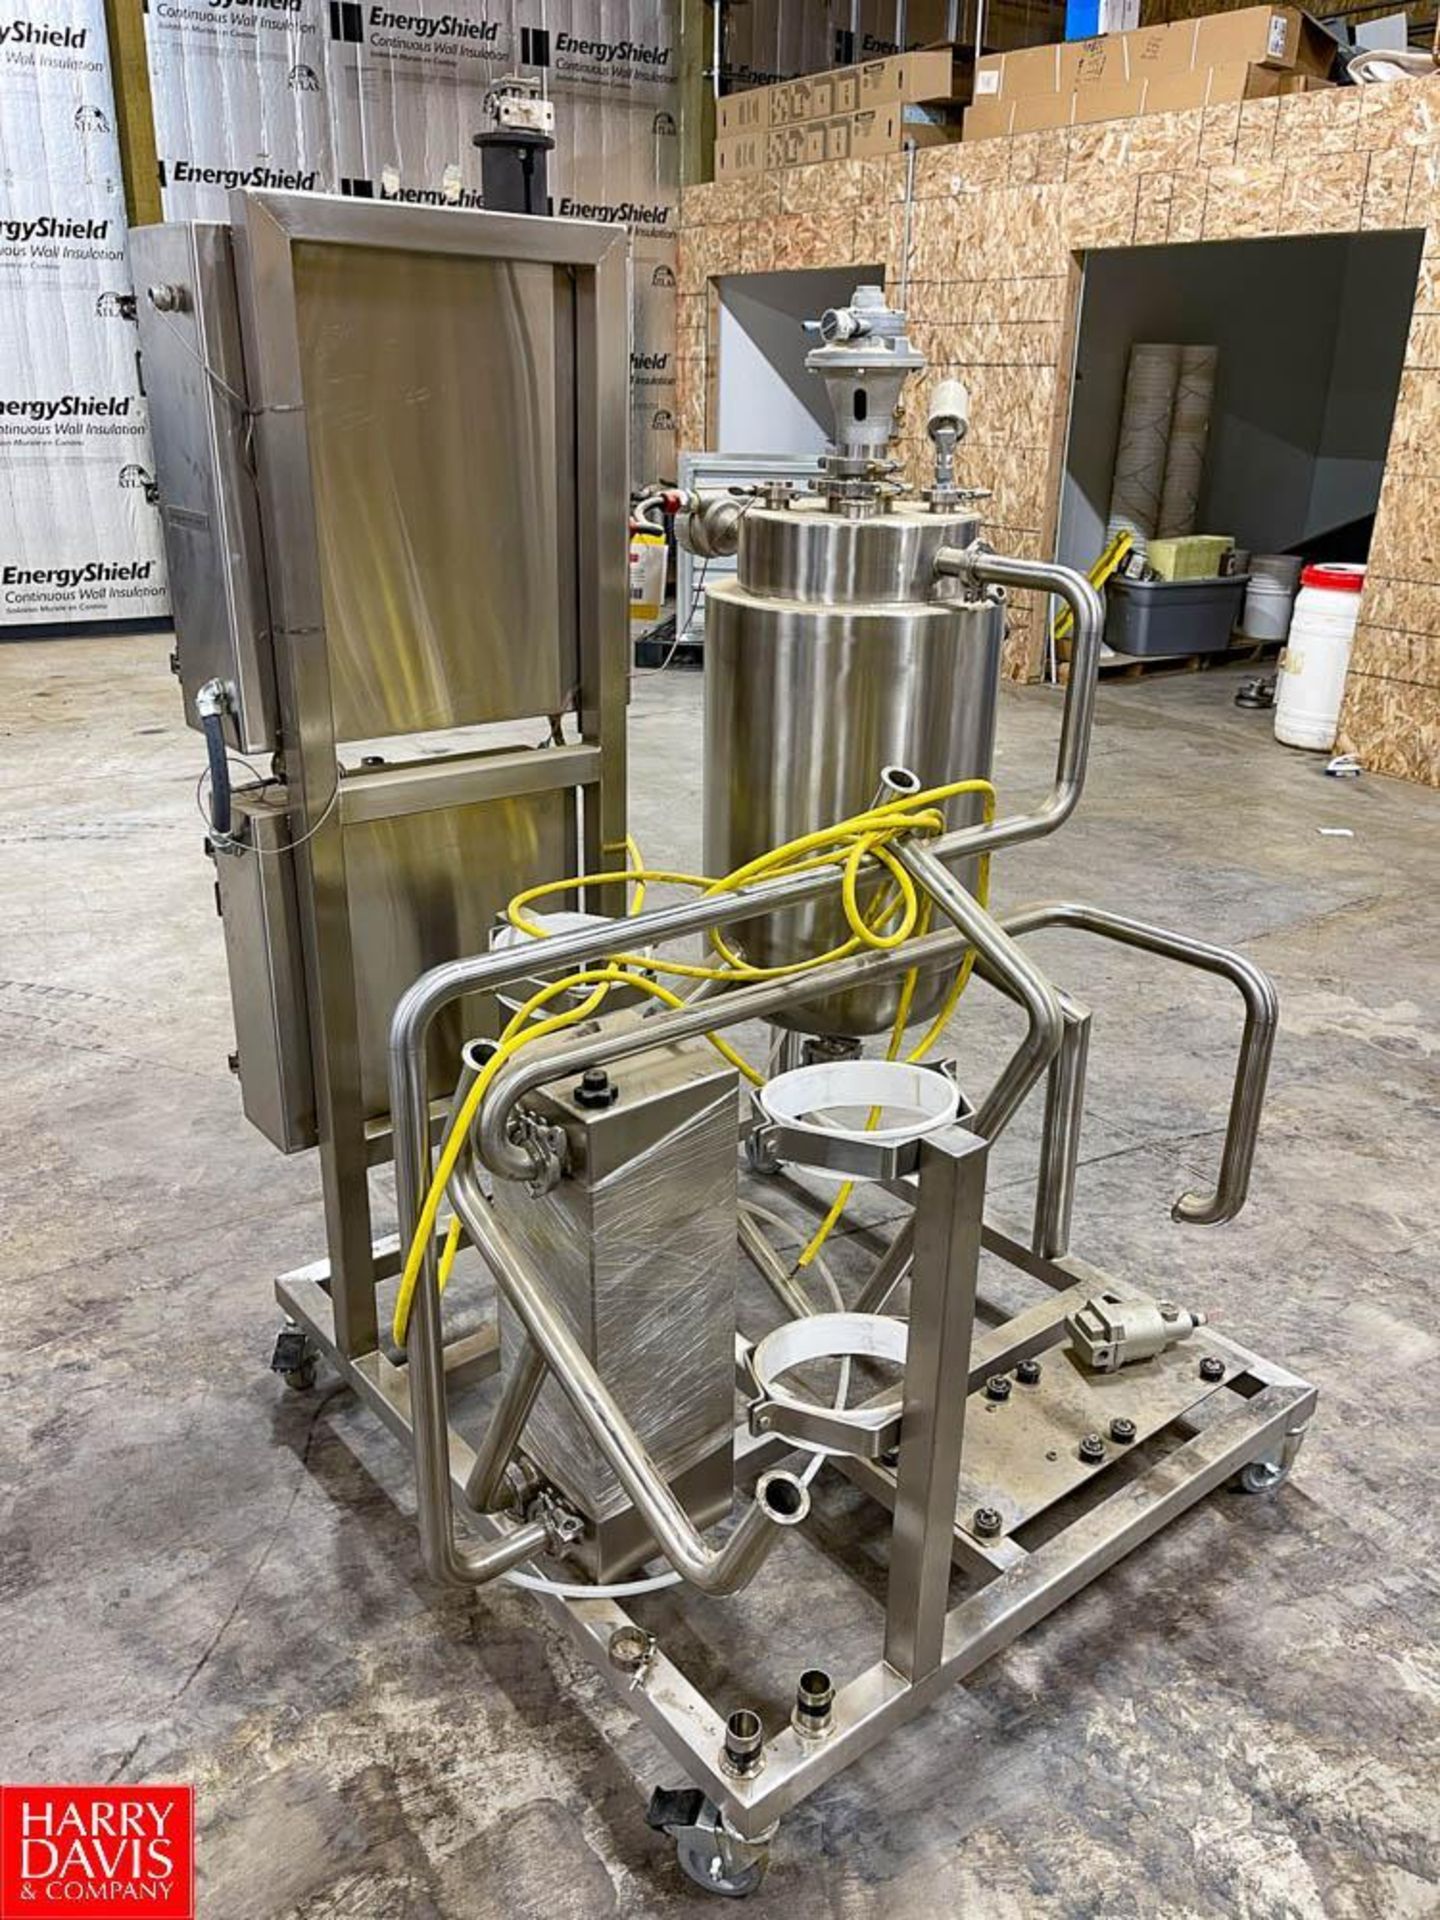 2019 Pinnacle Filtration Skid : S/N 3-001005, Mounted on Portable S/S Frame **Never Installed - Image 3 of 4